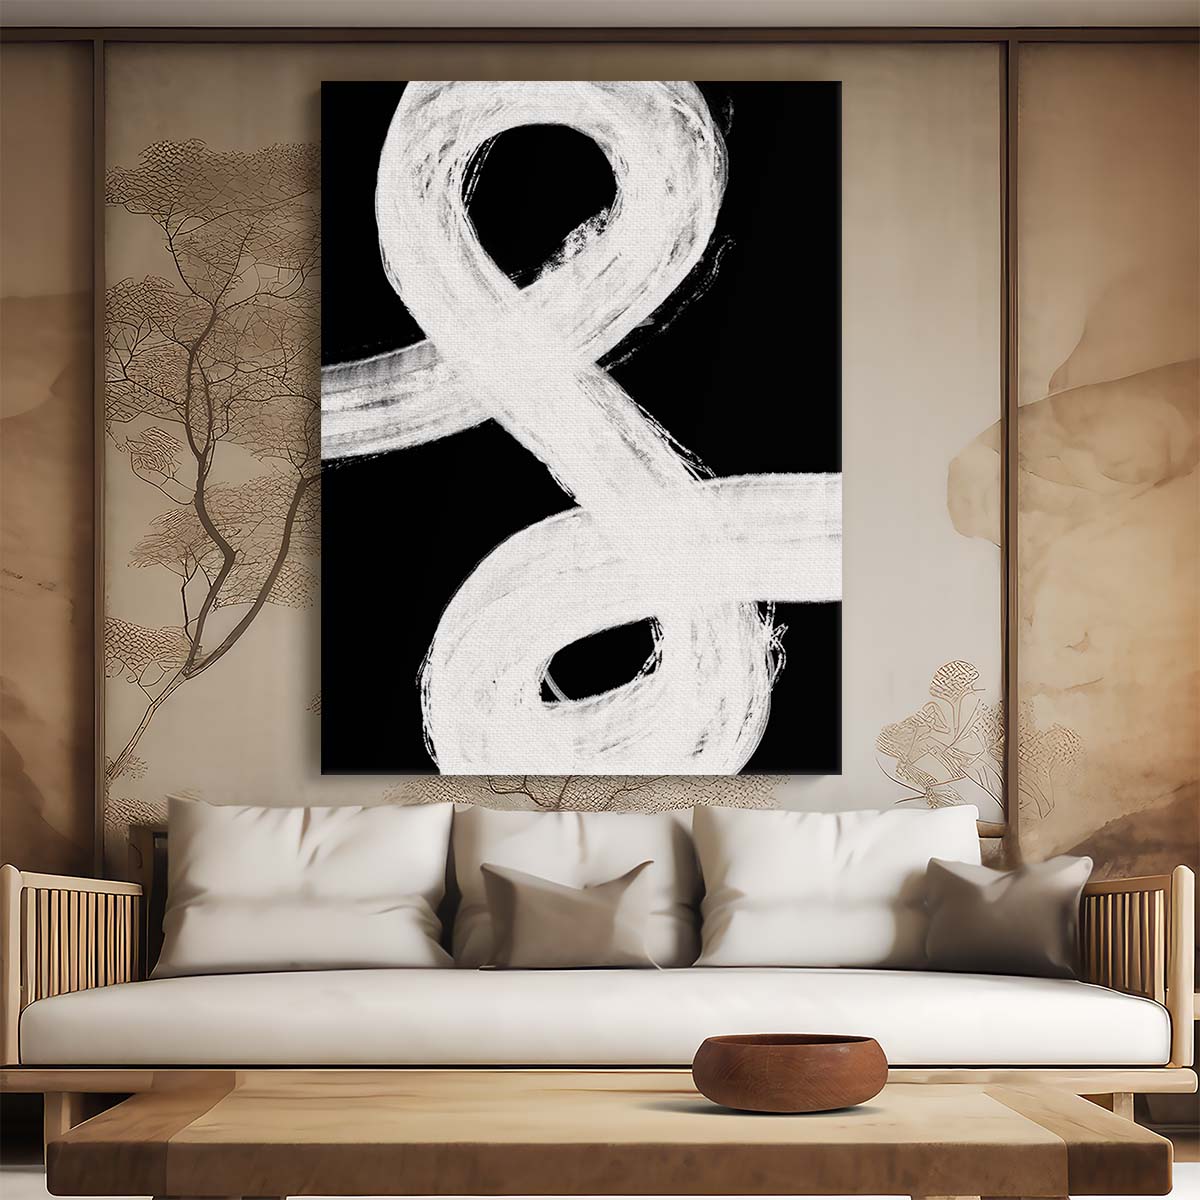 Monochrome Abstract Geometric Illustration Painting with Texture by Luxuriance Designs, made in USA